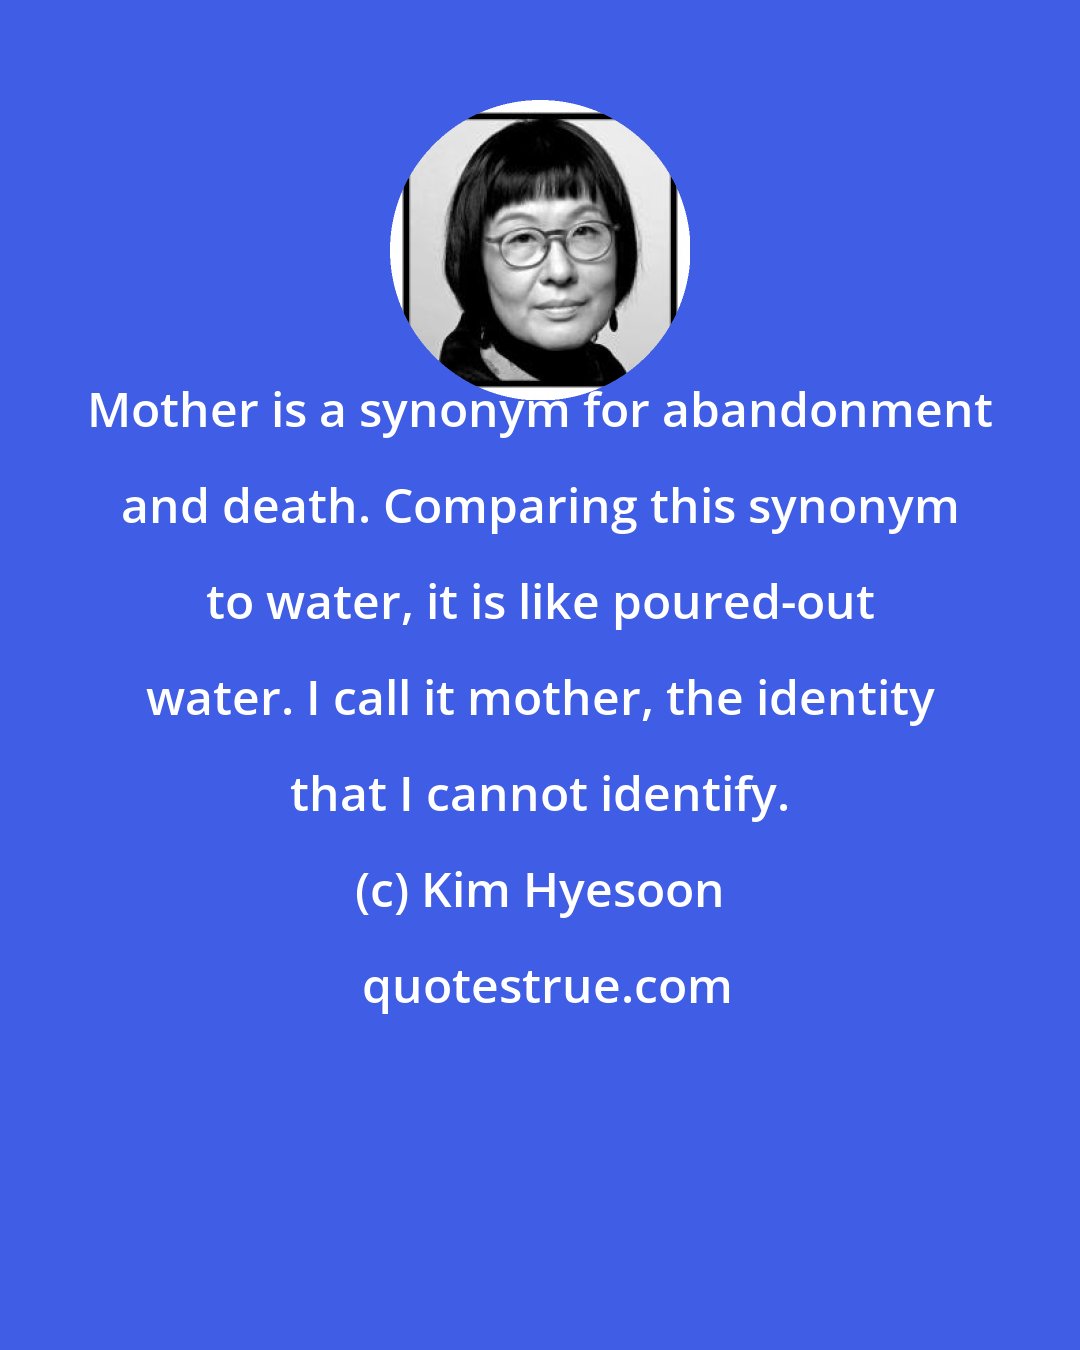 Kim Hyesoon: Mother is a synonym for abandonment and death. Comparing this synonym to water, it is like poured-out water. I call it mother, the identity that I cannot identify.